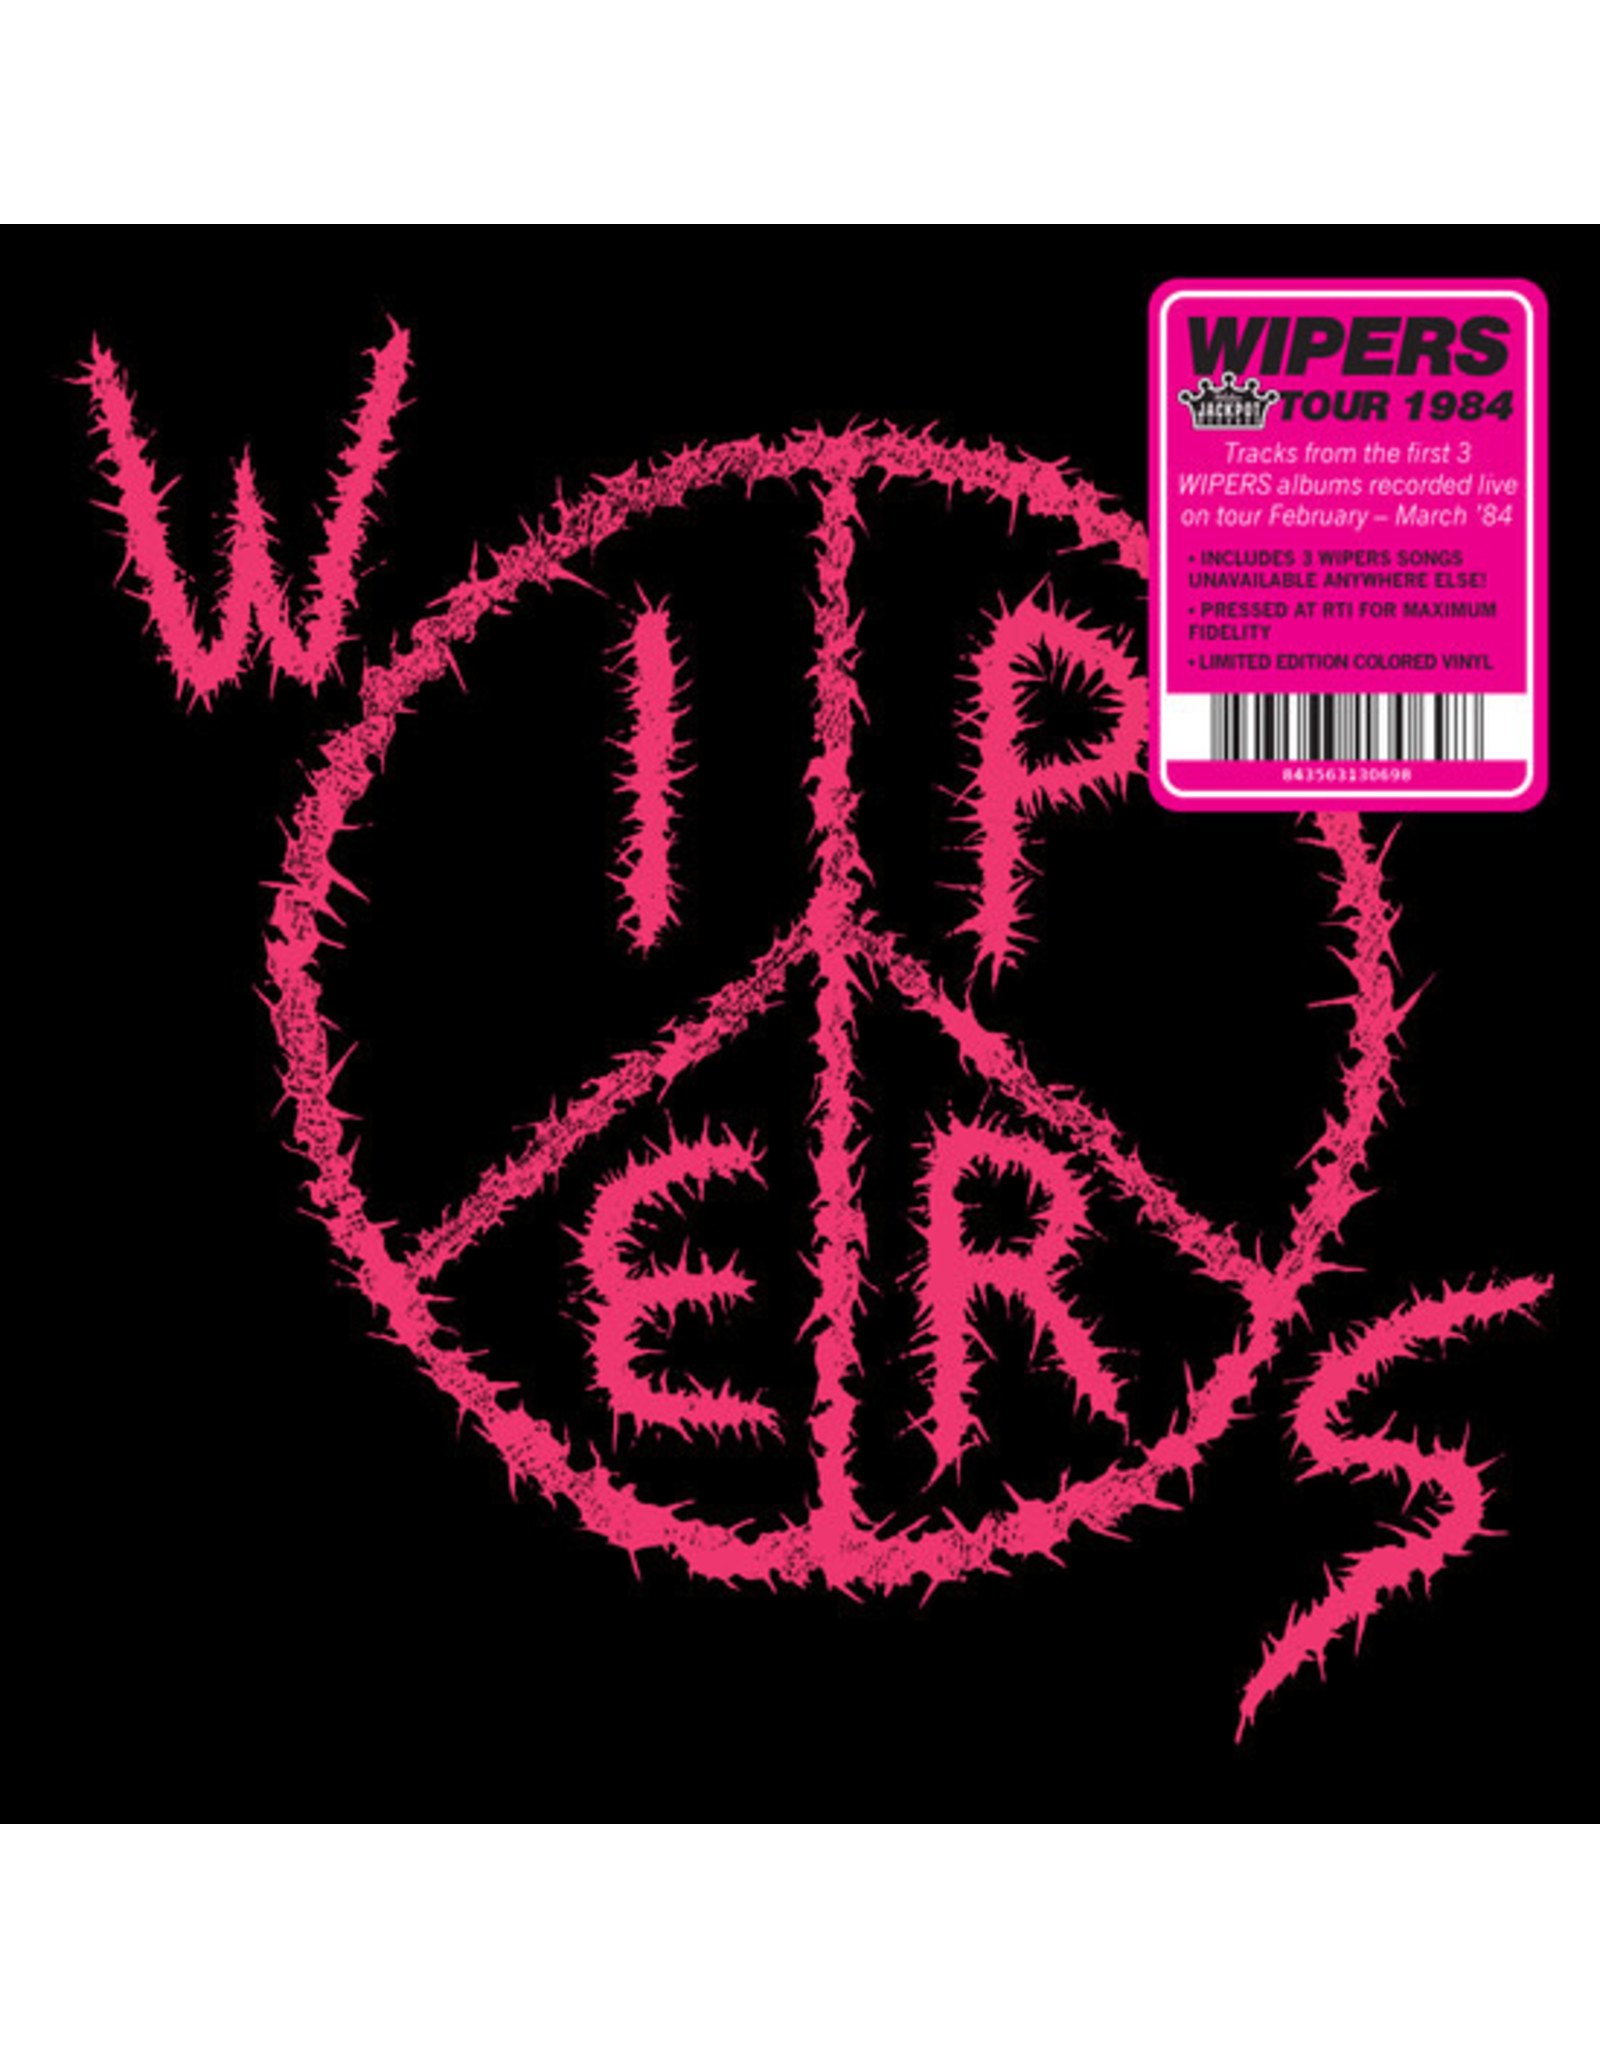 Jackpot Wipers: Wipers (aka Wipers Tour 84) (pink fluorescent) LP